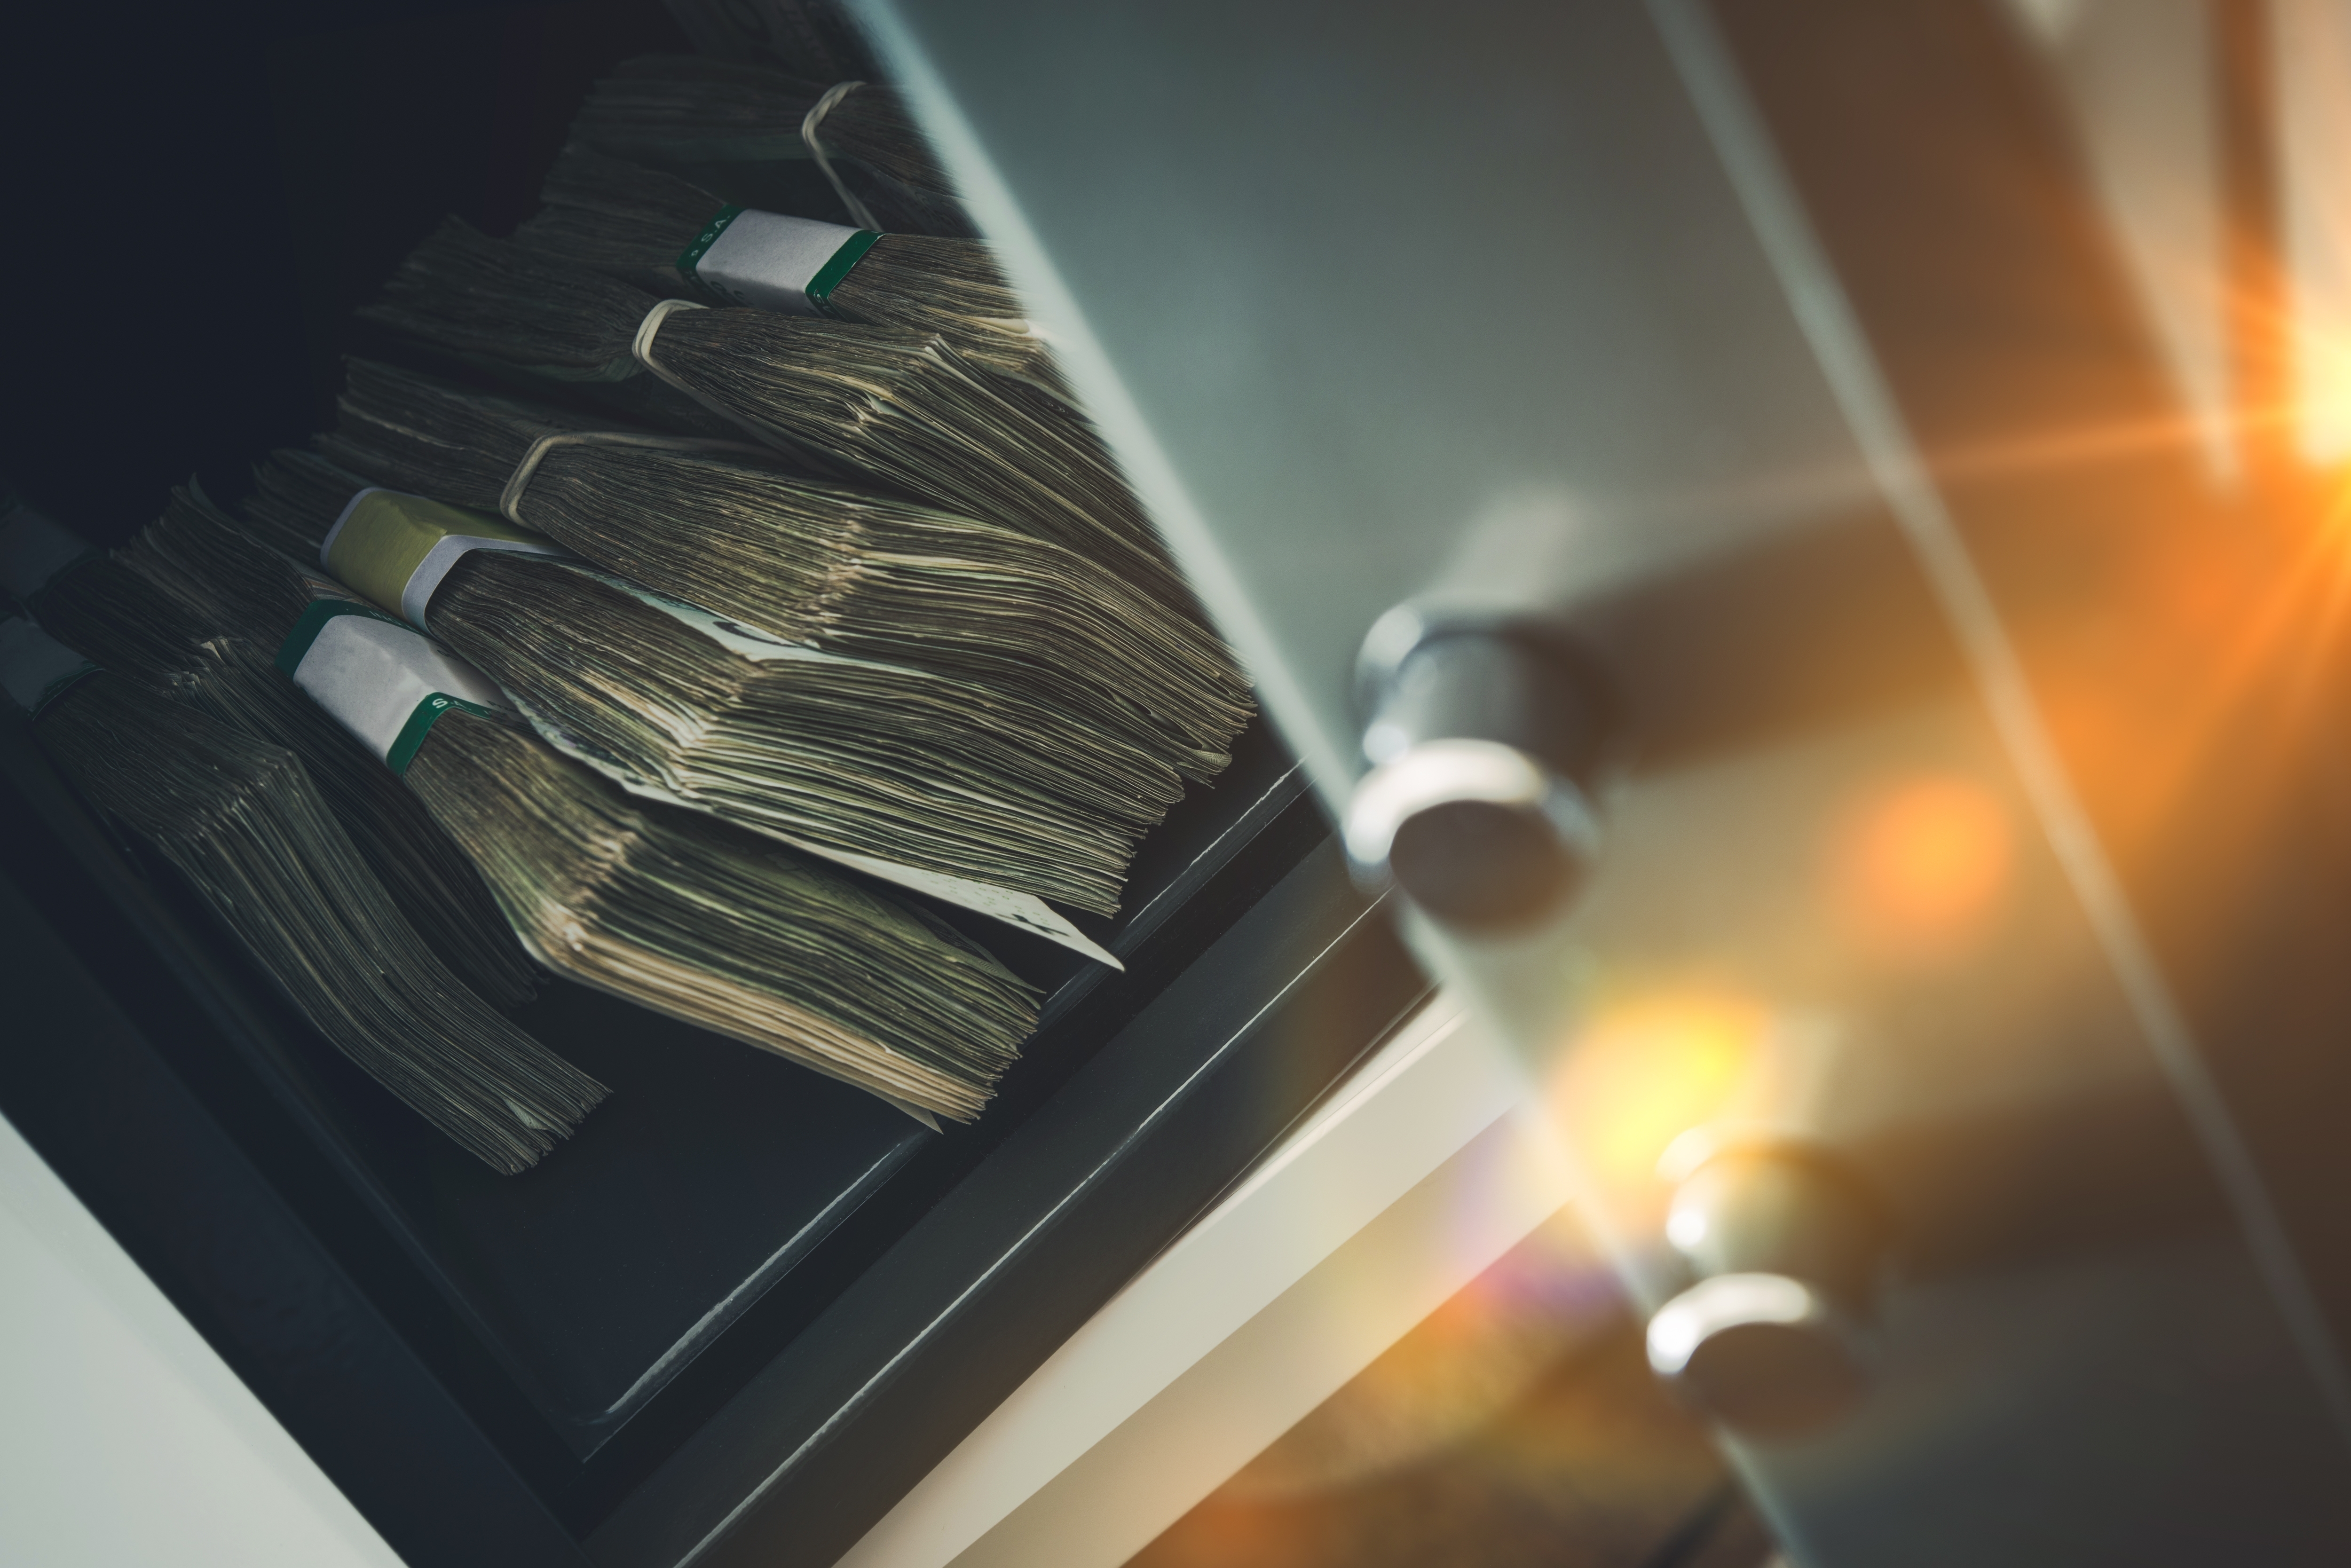 Vault with wads of cash | Source: Shutterstock